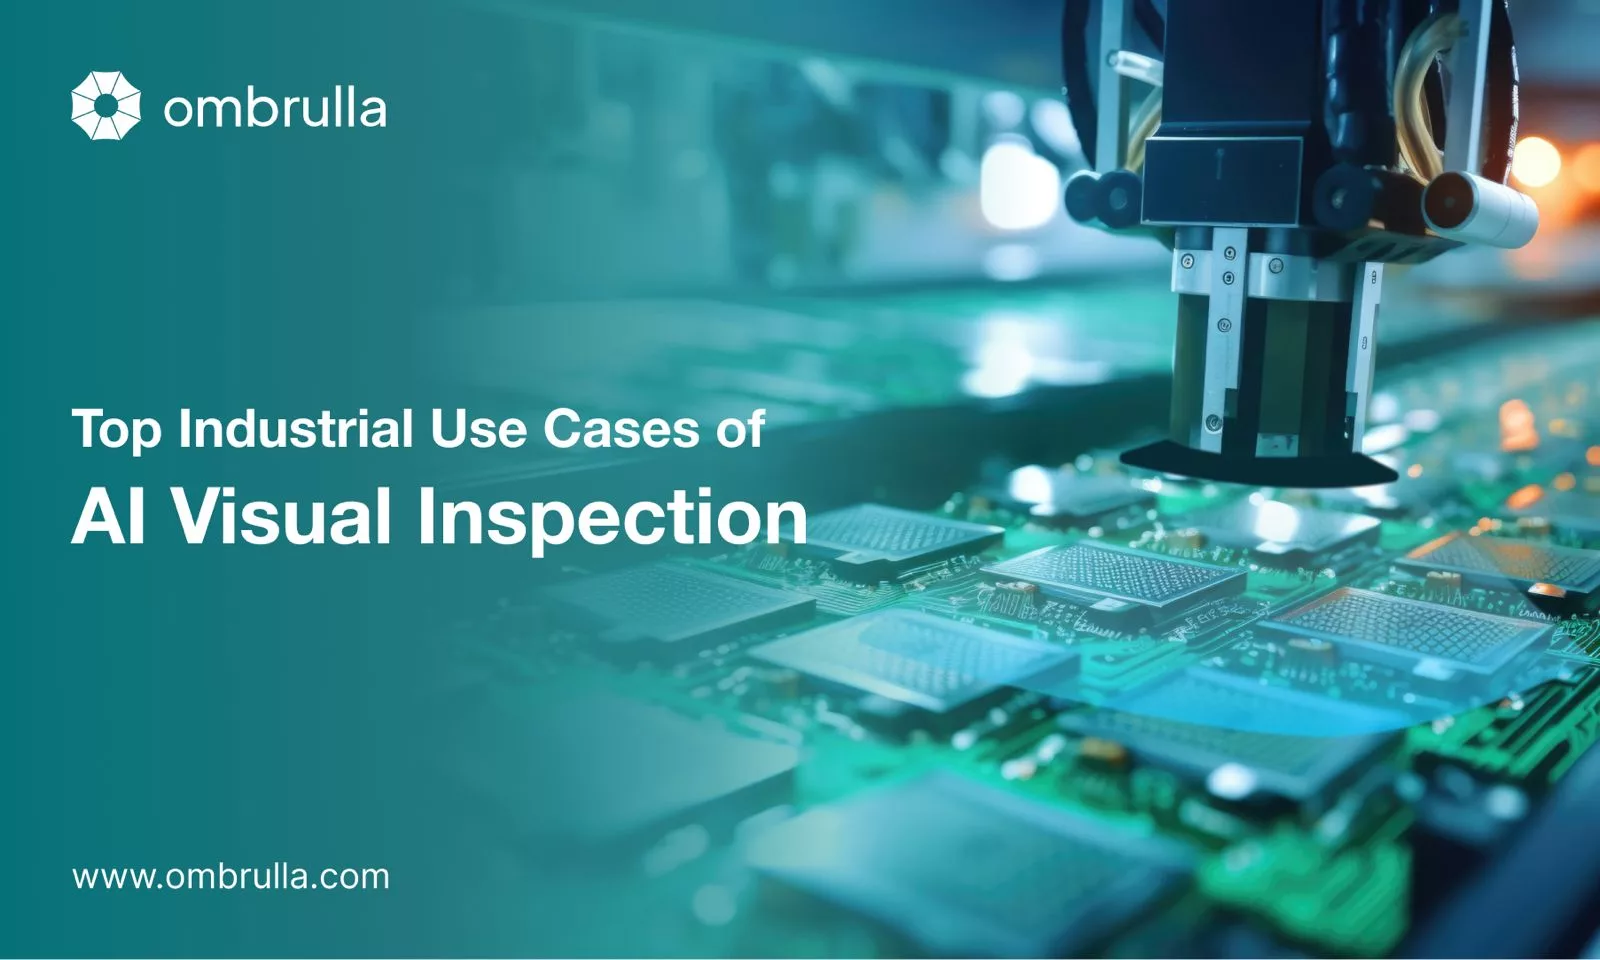 Exciting Applications Of AI Visual Inspection Across Industries